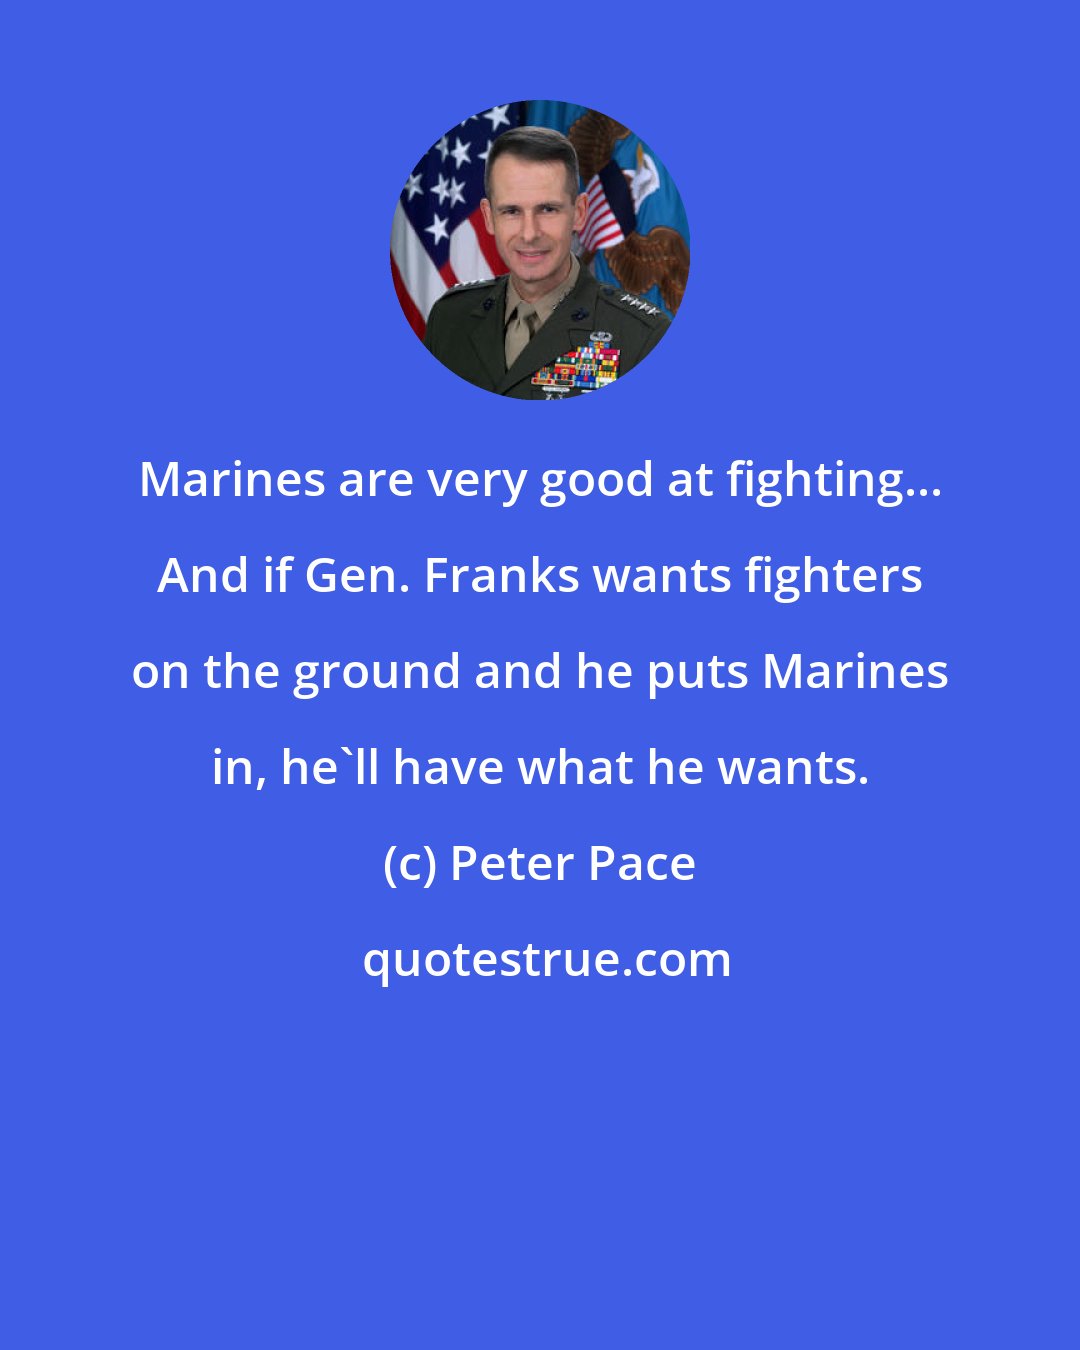 Peter Pace: Marines are very good at fighting... And if Gen. Franks wants fighters on the ground and he puts Marines in, he'll have what he wants.